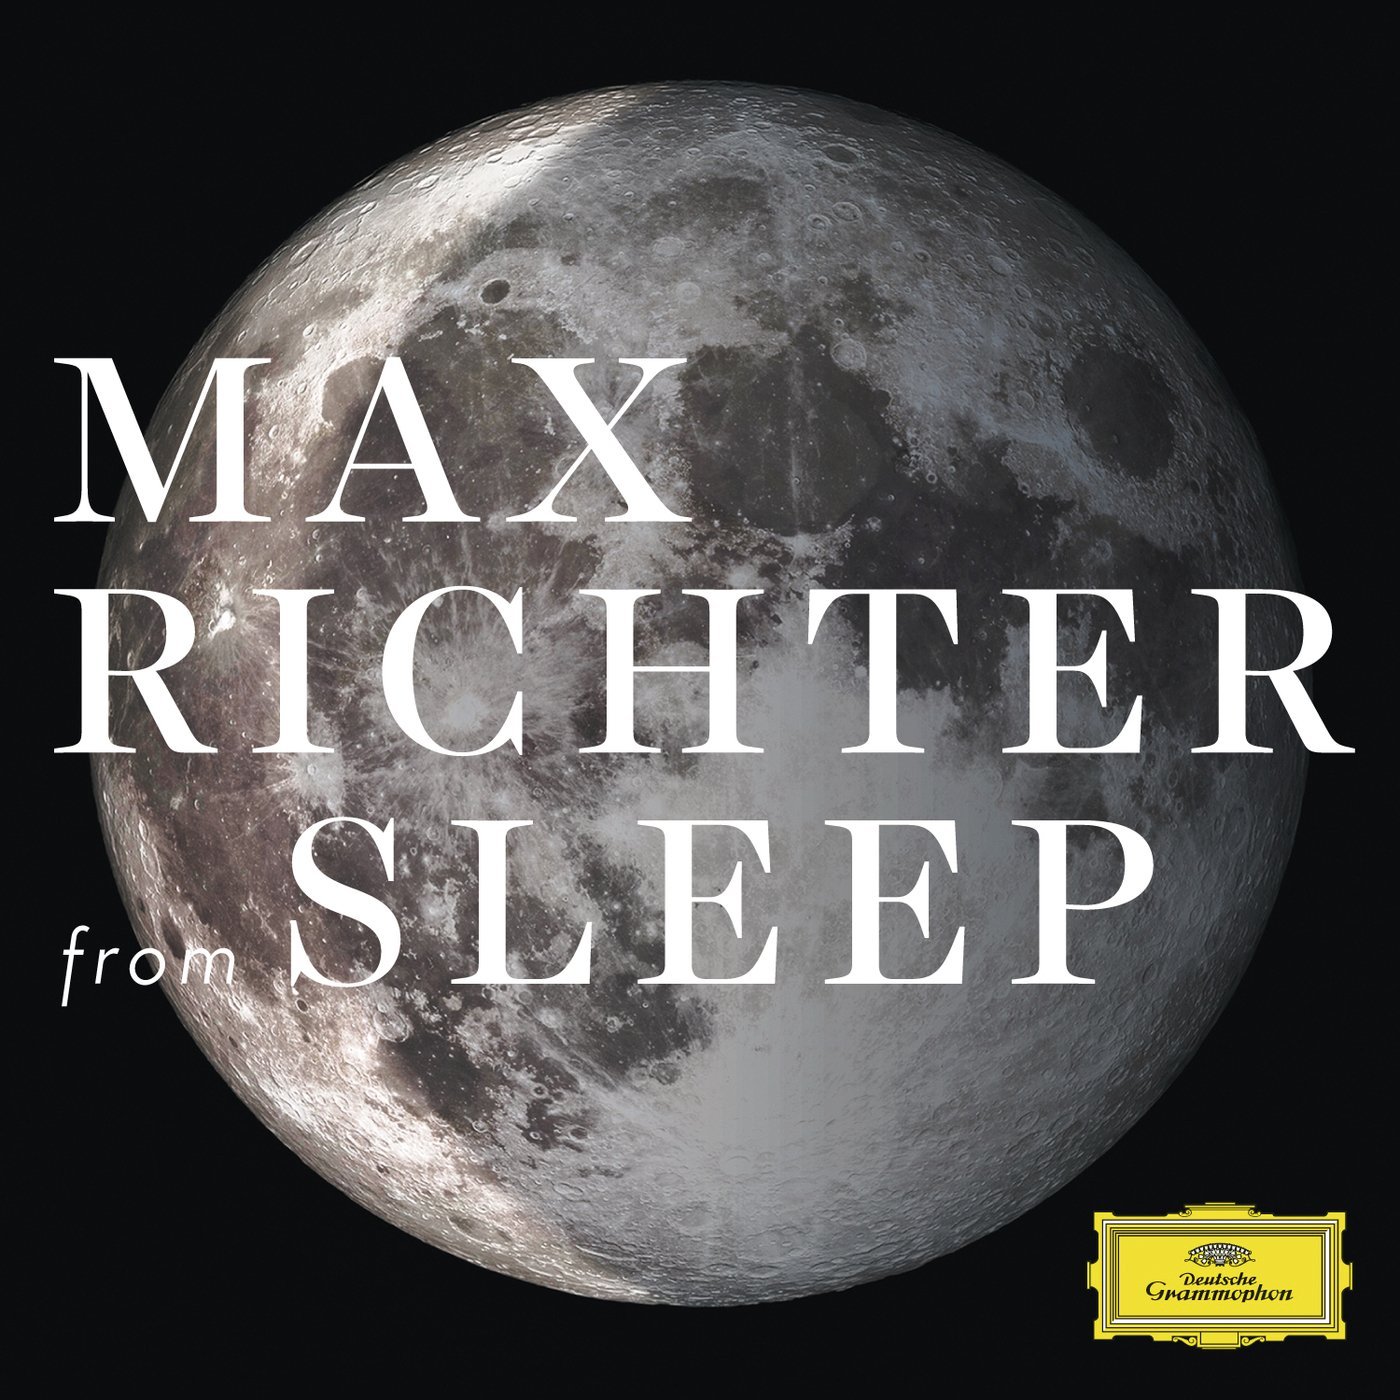 Max Richter - From Sleep {One Hour Version} (2015) [ProStudioMasters FLAC 24bit/96kHz]